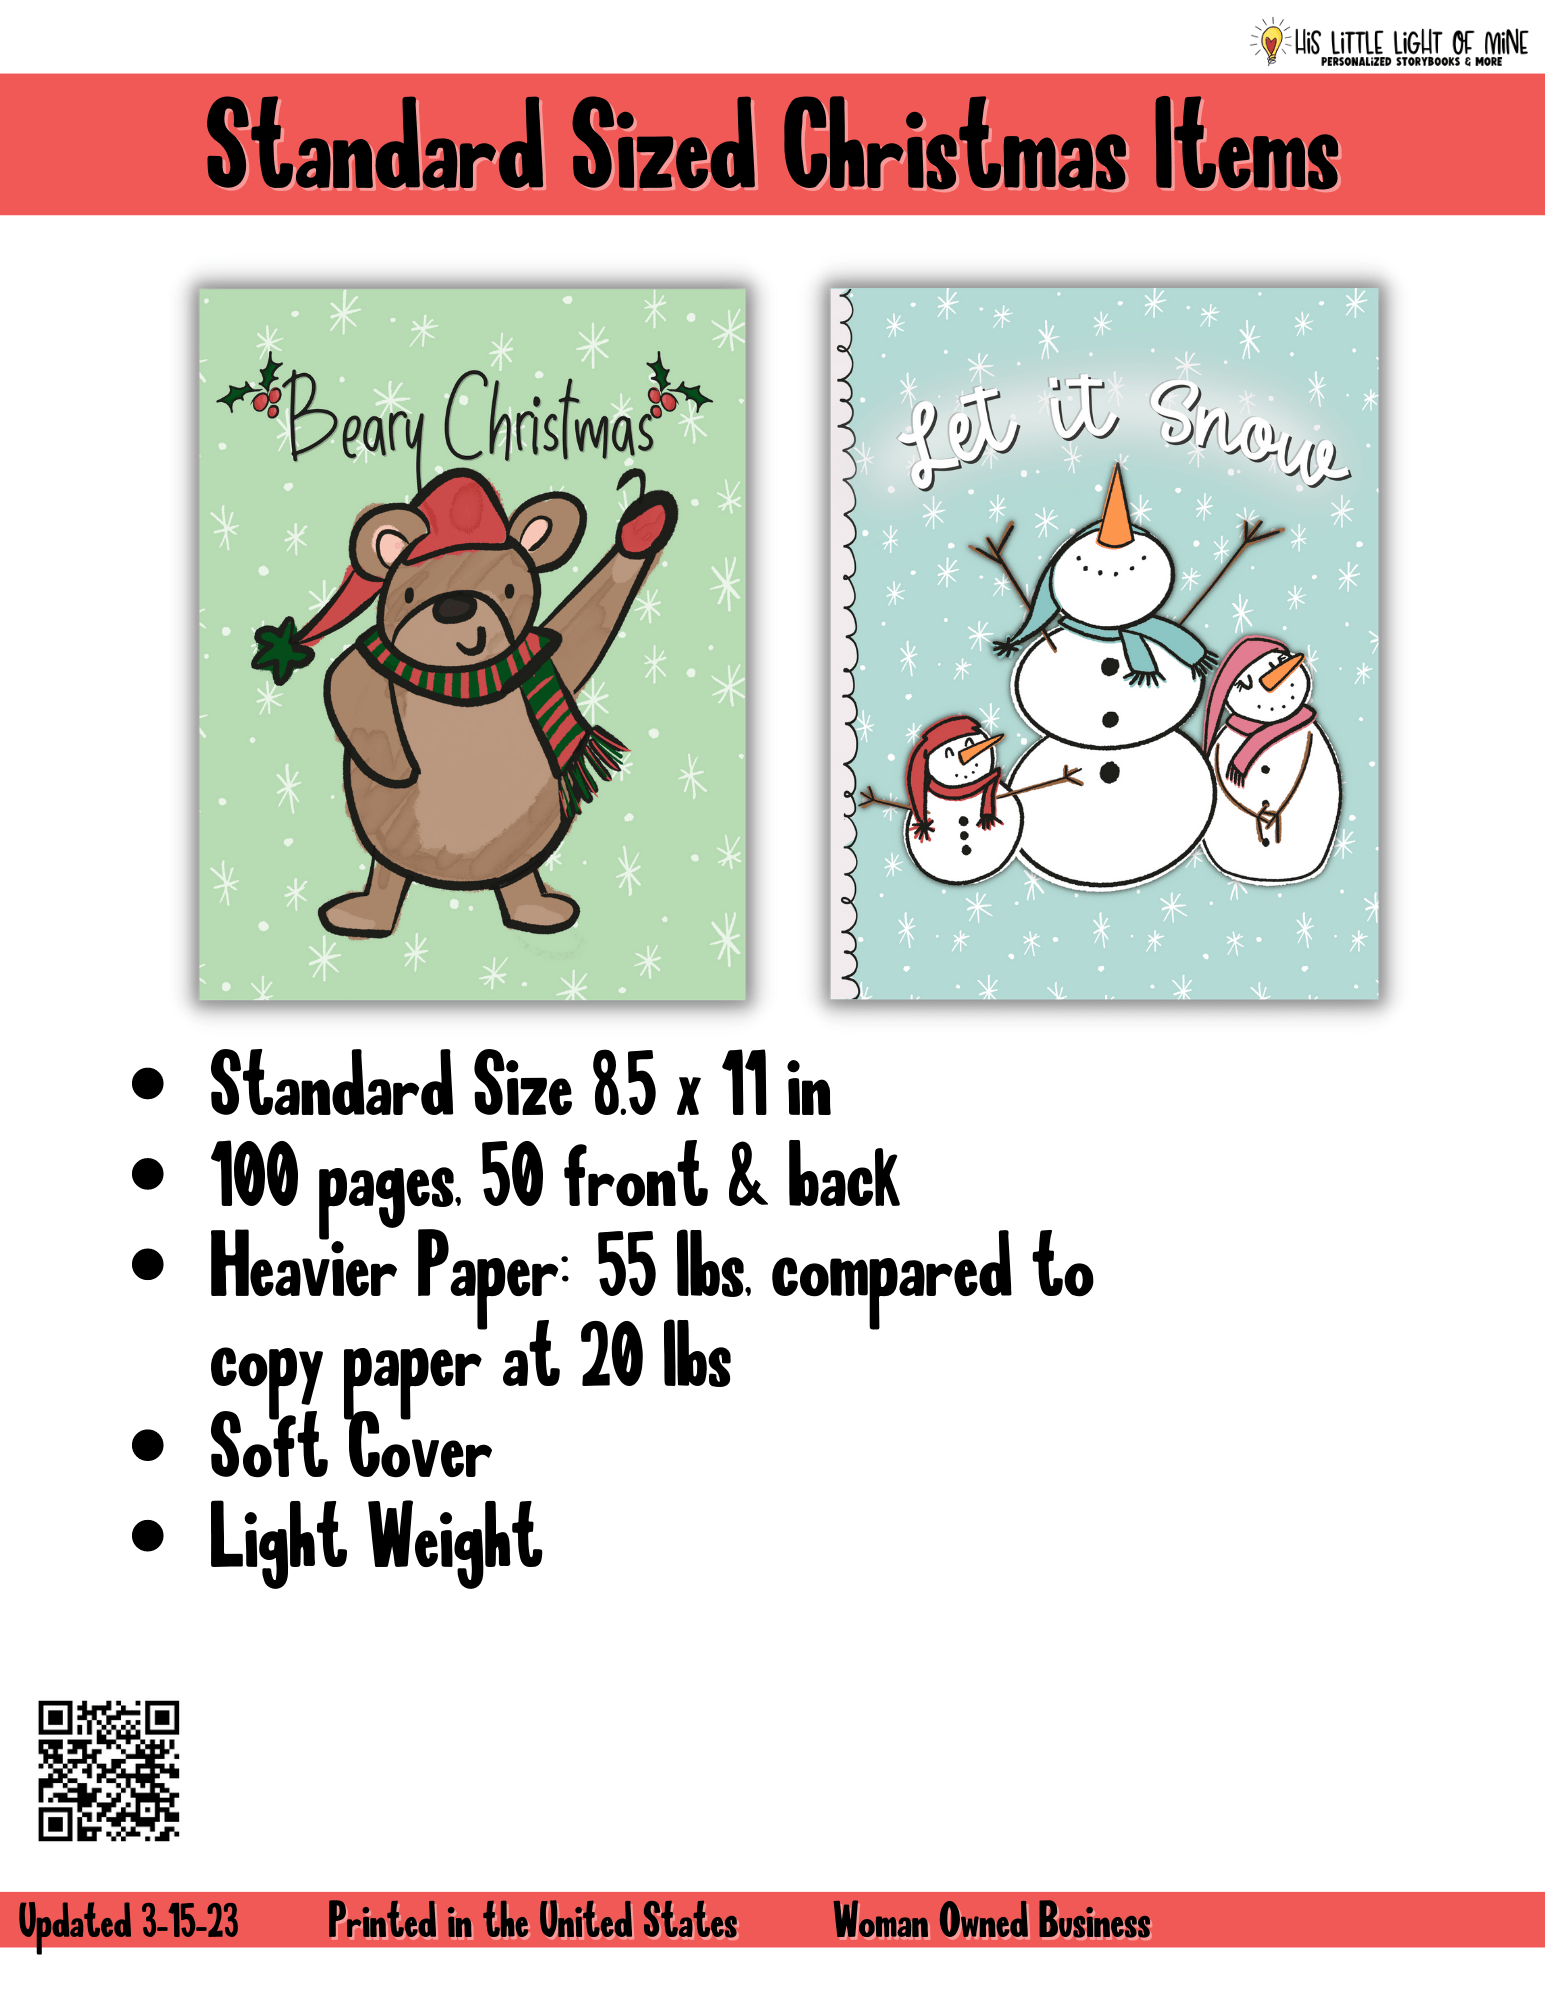 Bulk ad of the standard sized Christmas and winter themed lined journals and sketchbooks self-published through Amazon Kindle Direct Publishing